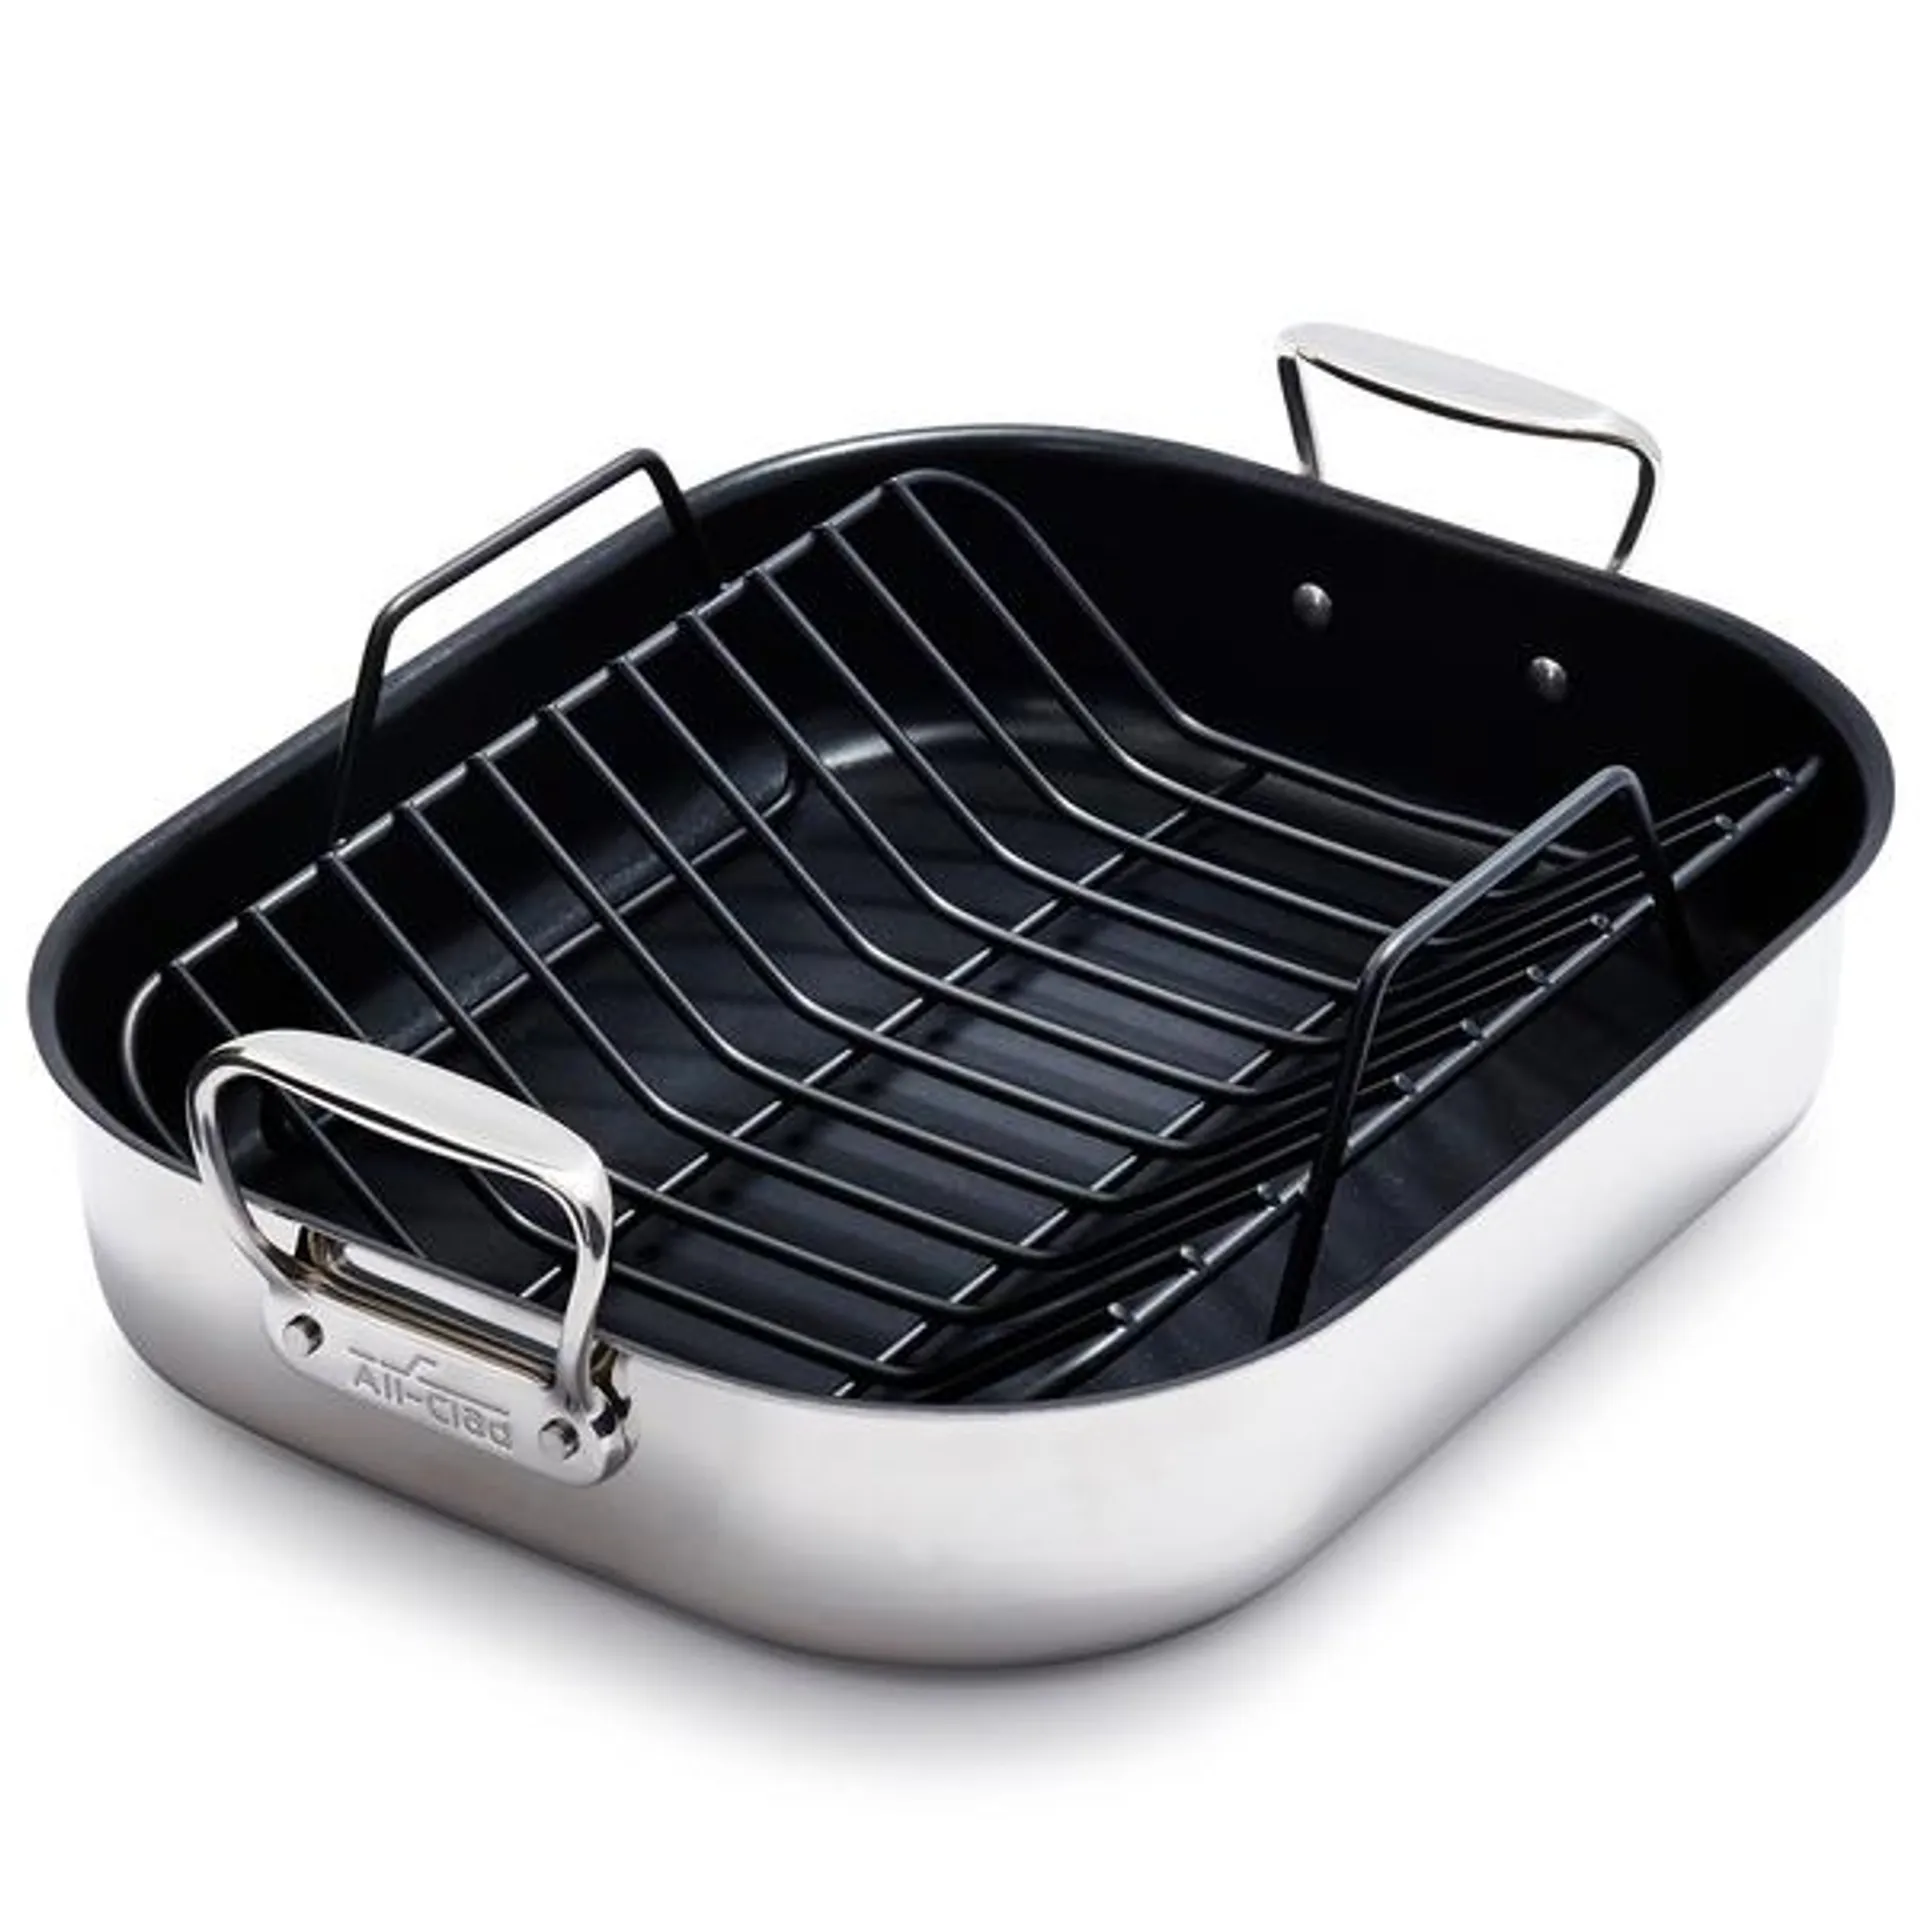 All-Clad Nonstick Roasting Pan with Nonstick Rack, 13" x 16"